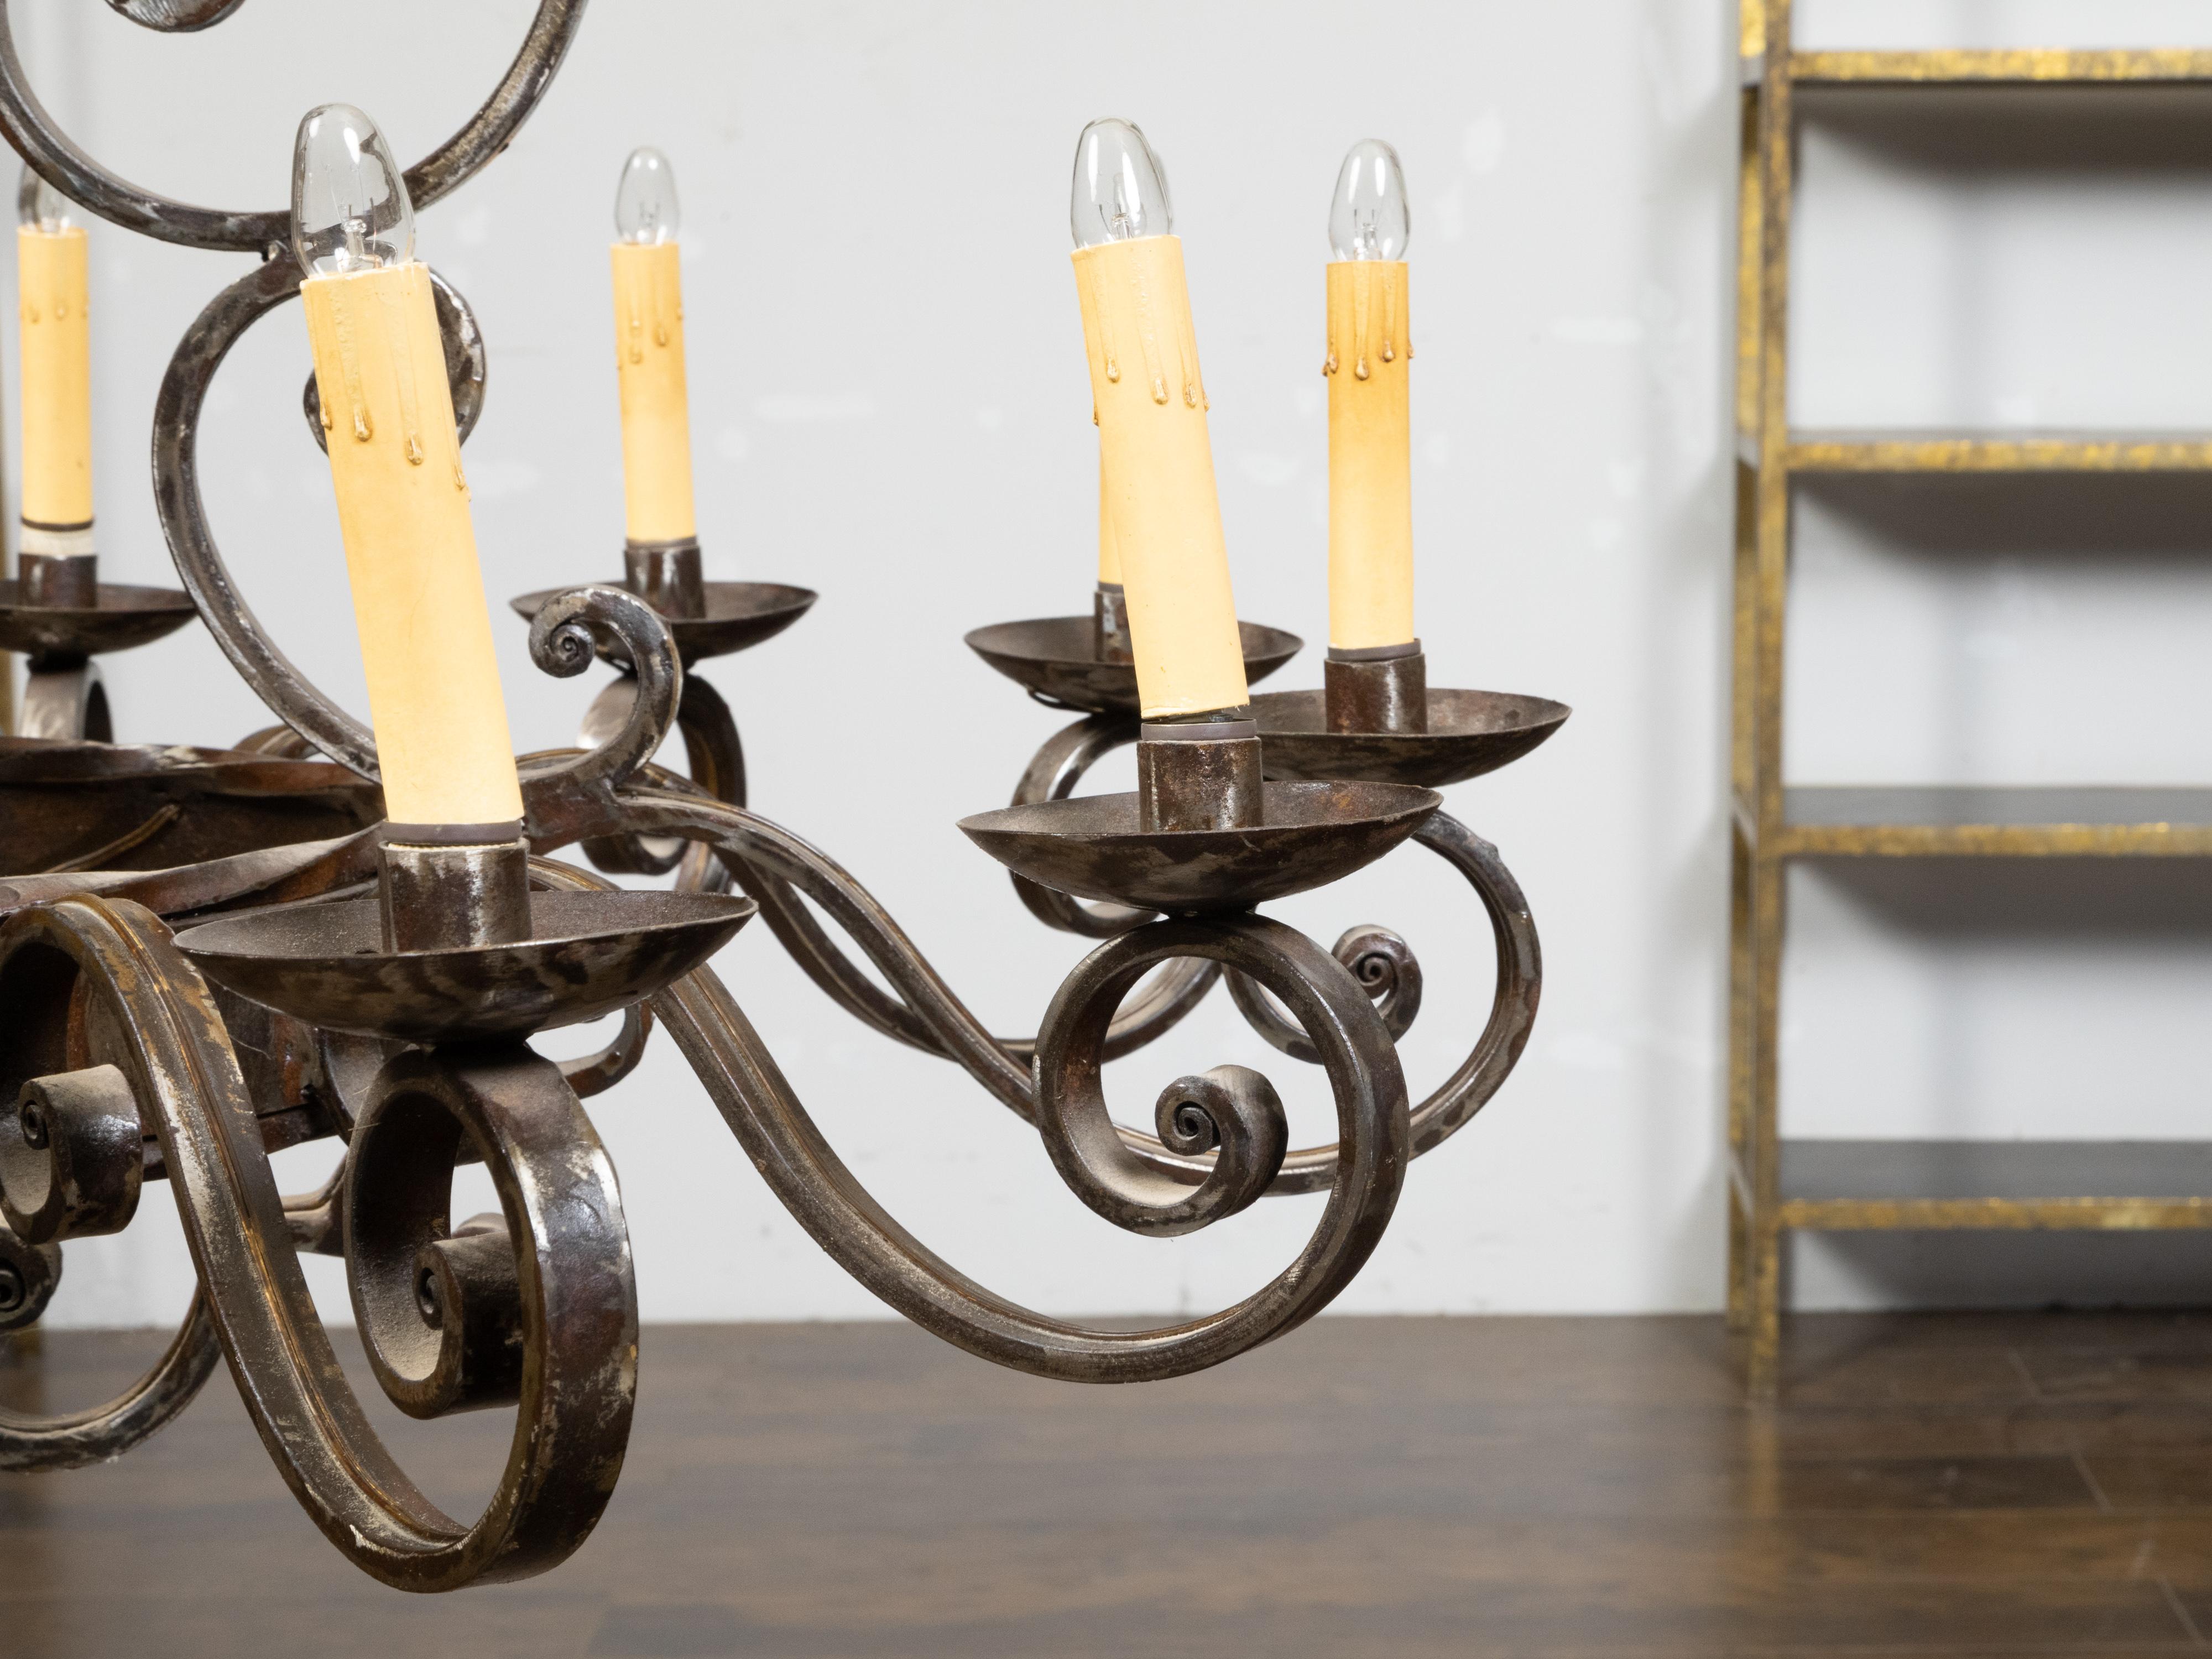 Midcentury French Steel 12-Light Chandelier with Scrolls and Dark Patina For Sale 3